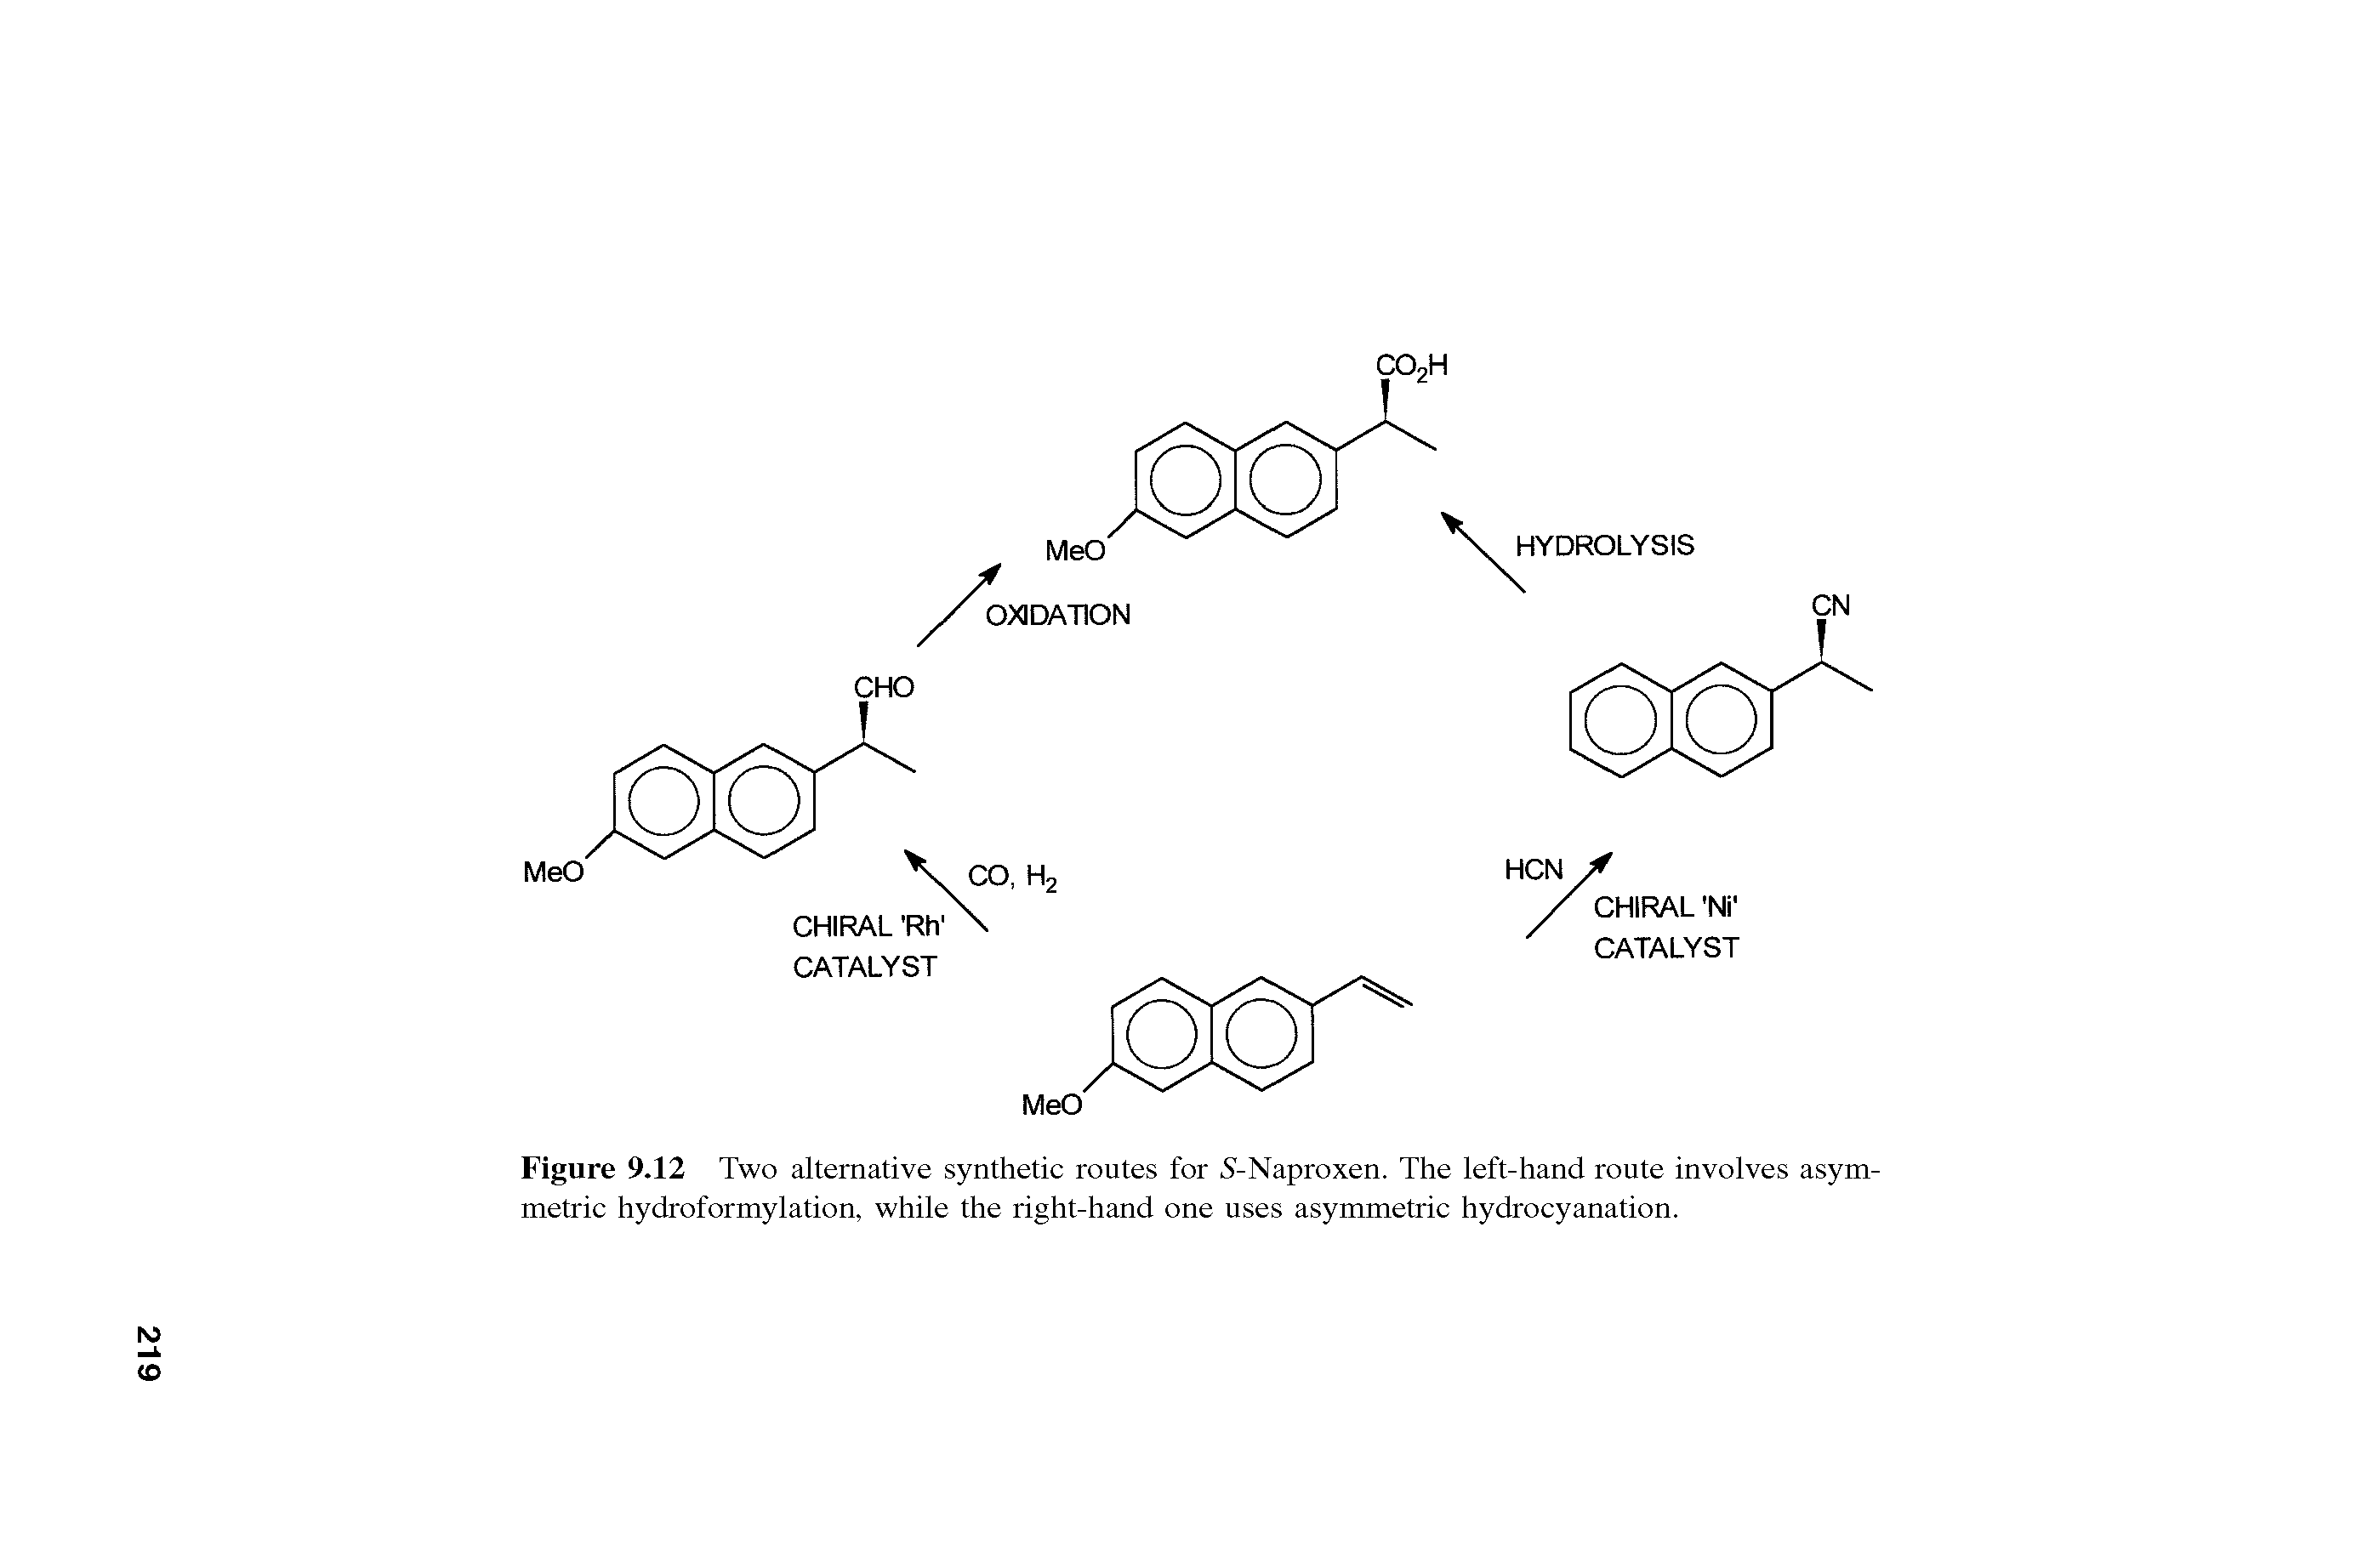 Figure 9.12 Two alternative synthetic routes for 5-Naproxen. The left-hand route involves asymmetric hydroformylation, while the right-hand one uses asymmetric hydrocyanation.